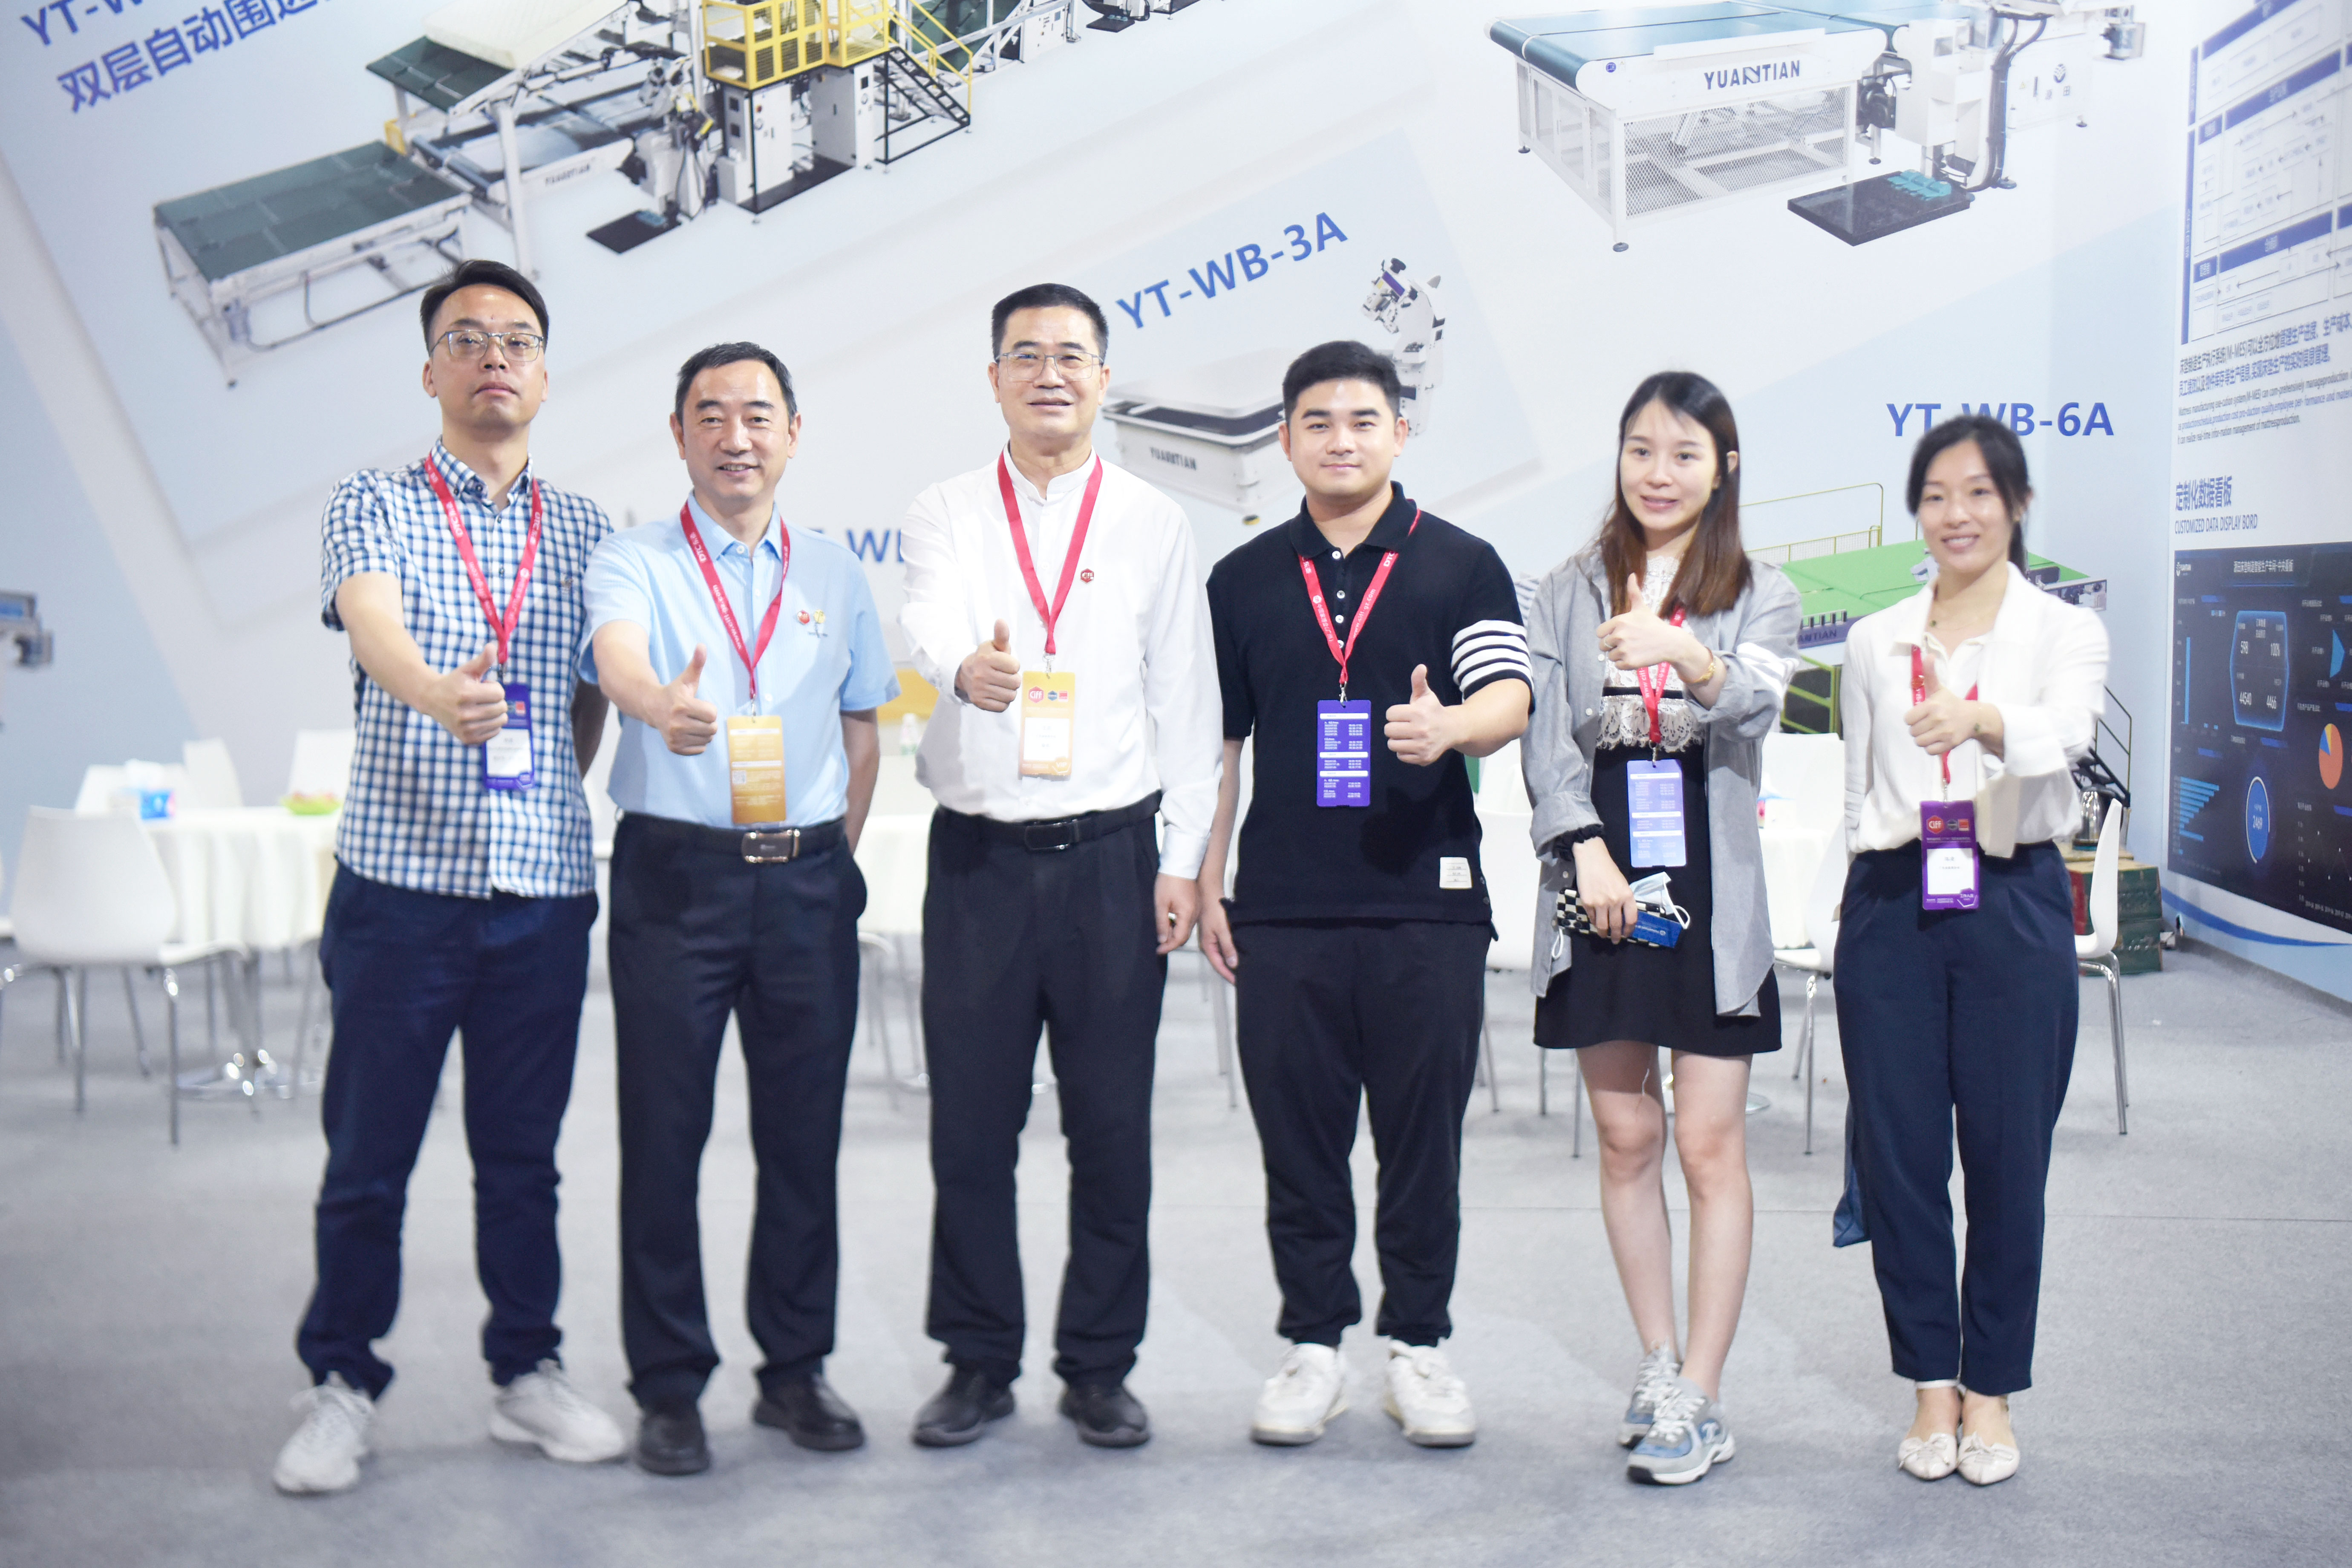 [exhibition information] the 49th China Guangzhou International Furniture production equipment and Ingredients Exhibition in 2022, we meet you in Pazhou, Guangzhou